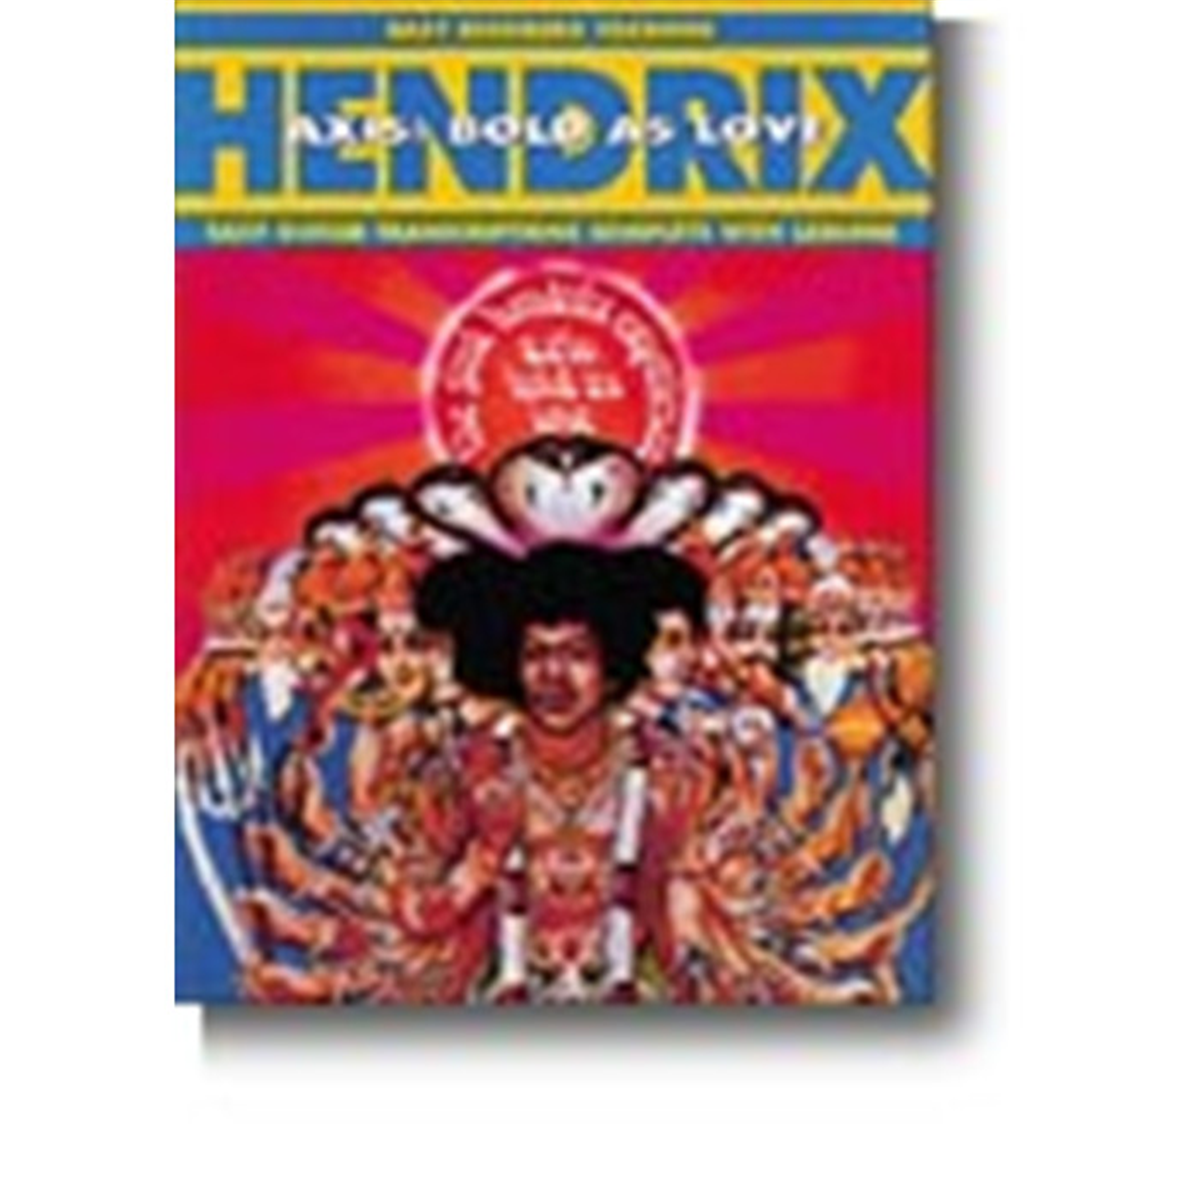 HENDRIX Jimmy Axis Bold AS  AM91389